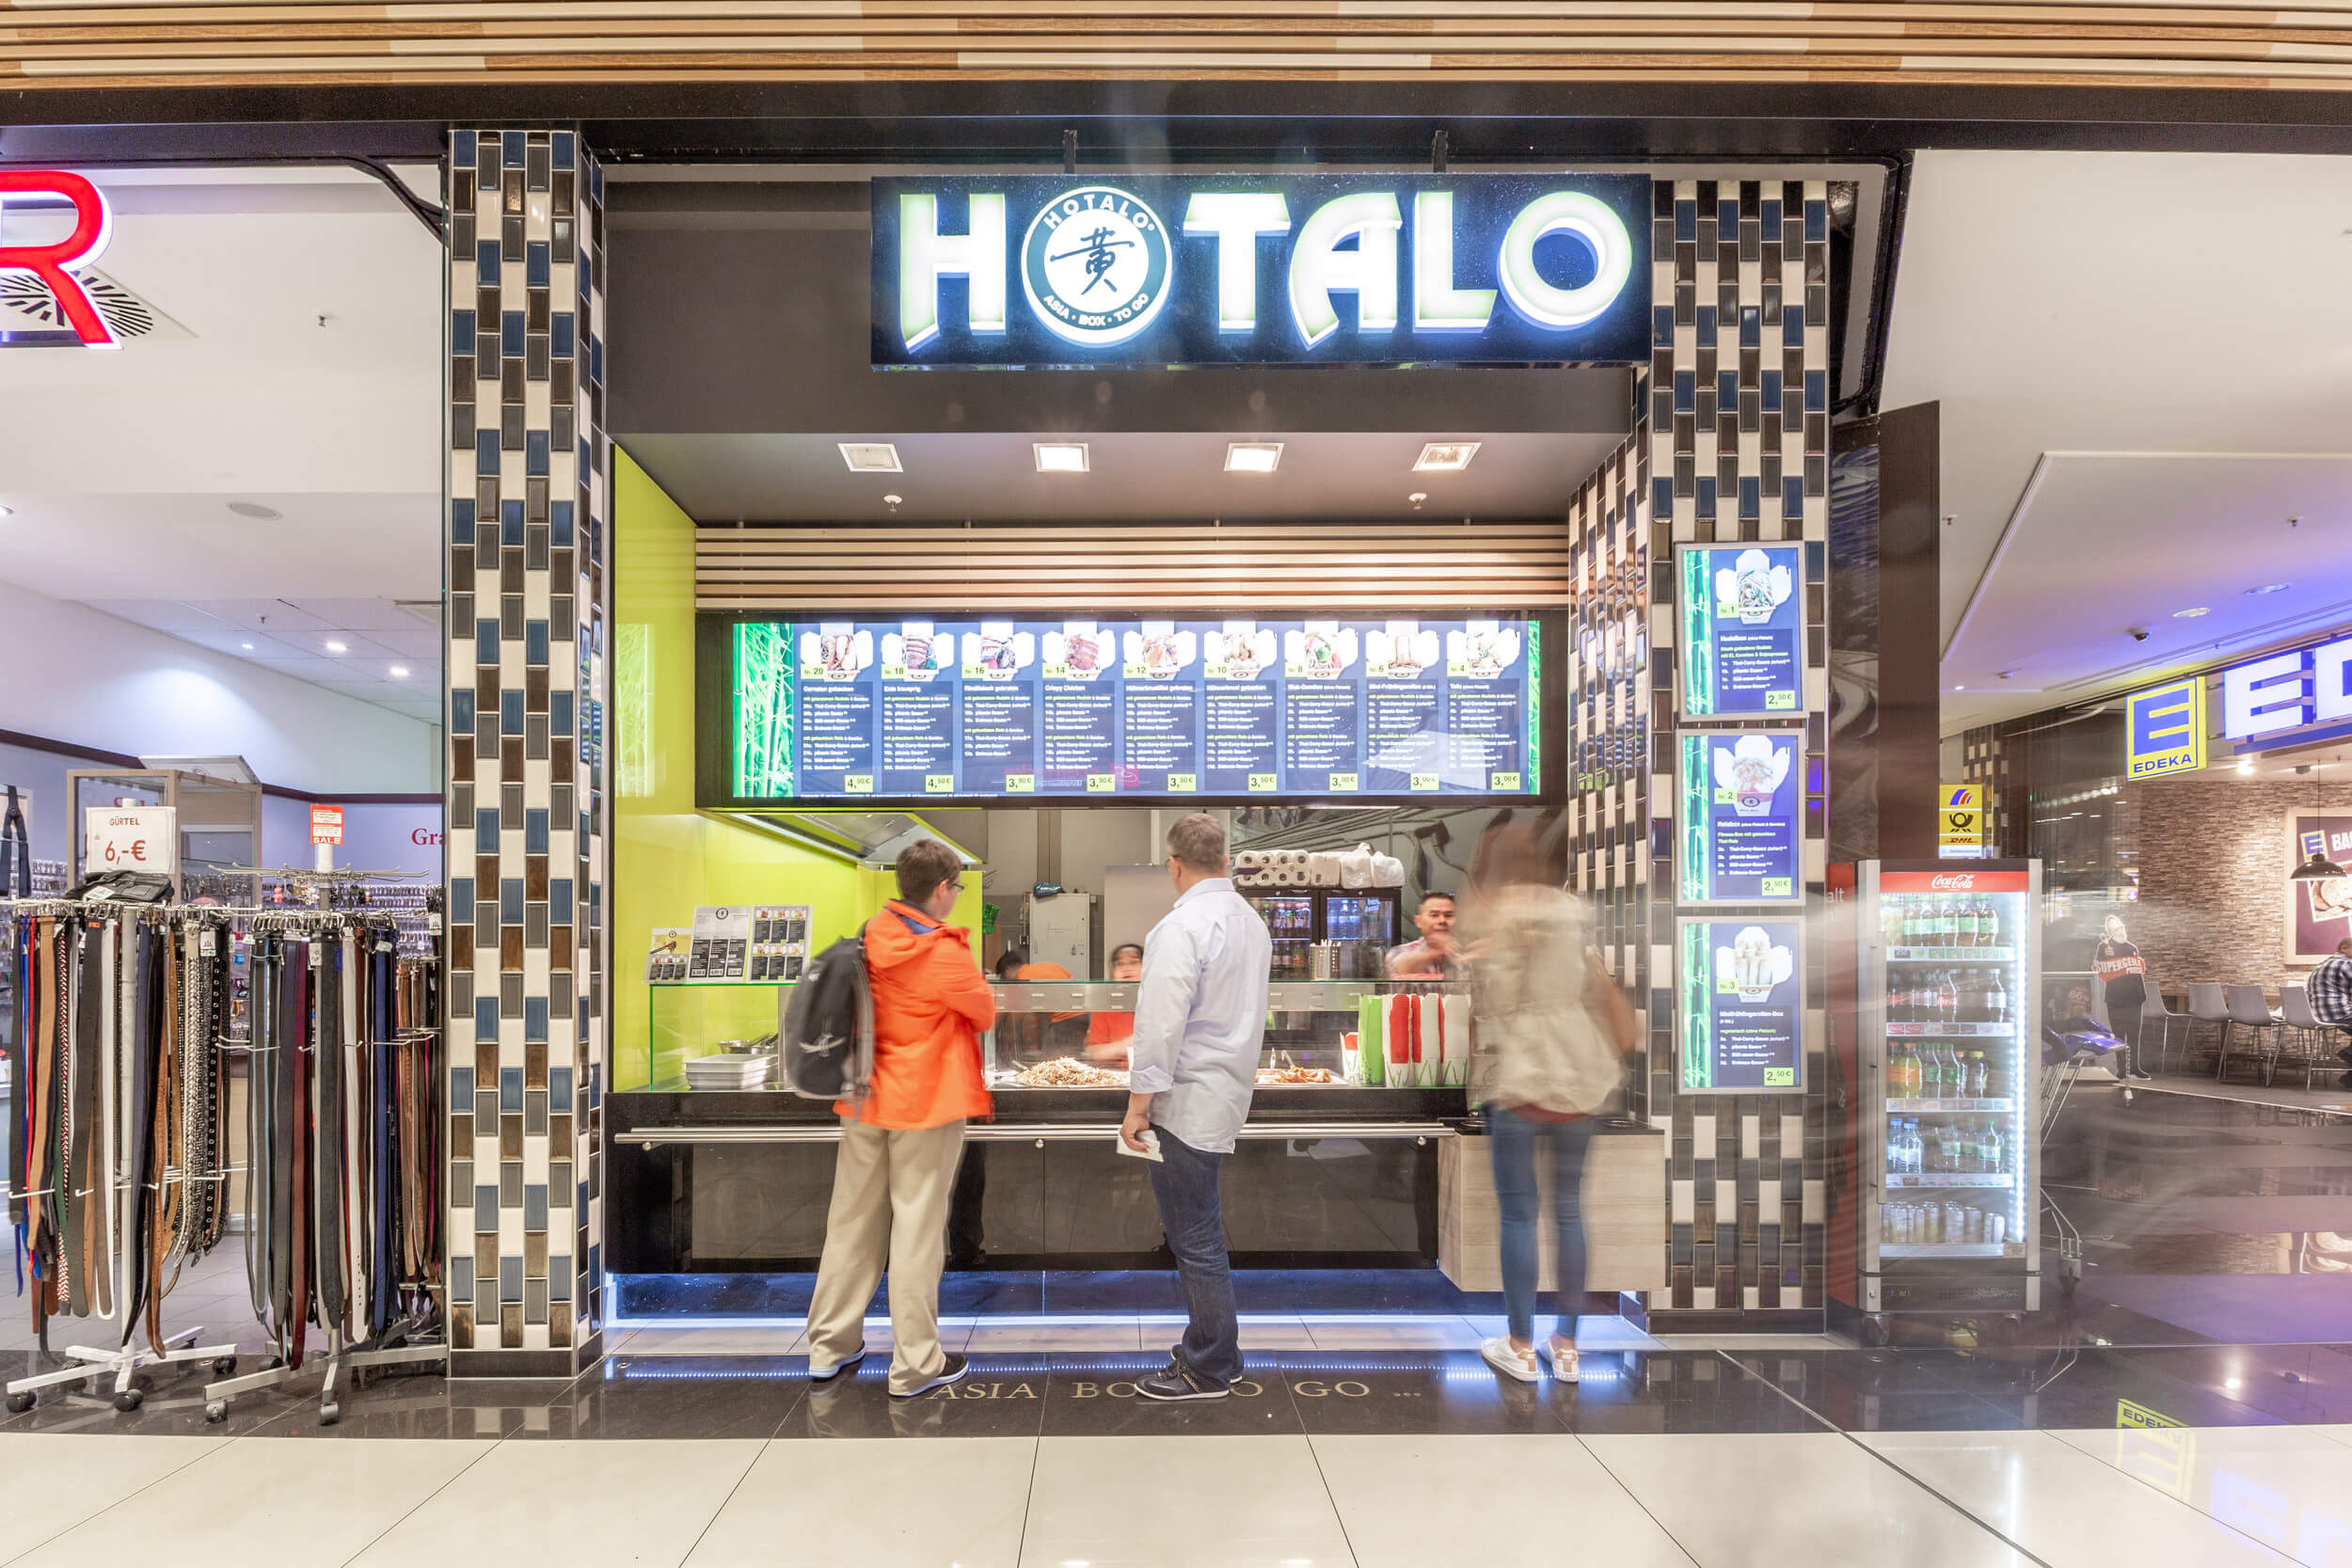 Hotalo - Asia Fast Food Restaurant at the Mall of Berlin